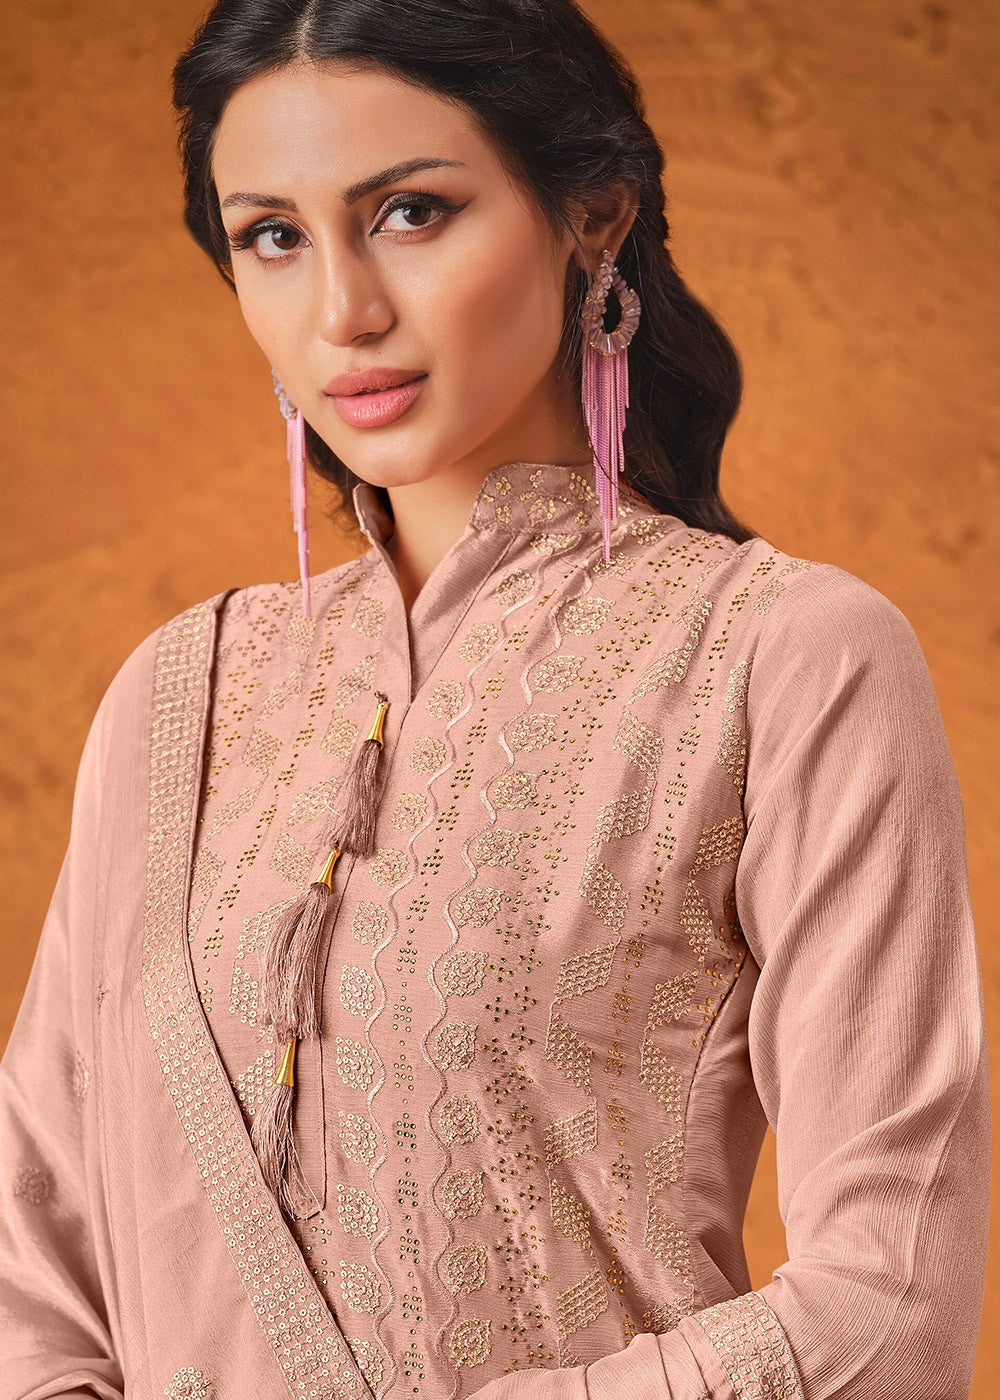 Buy Salmon Peach Chiffon Suit - Embroidered Sharara Suit